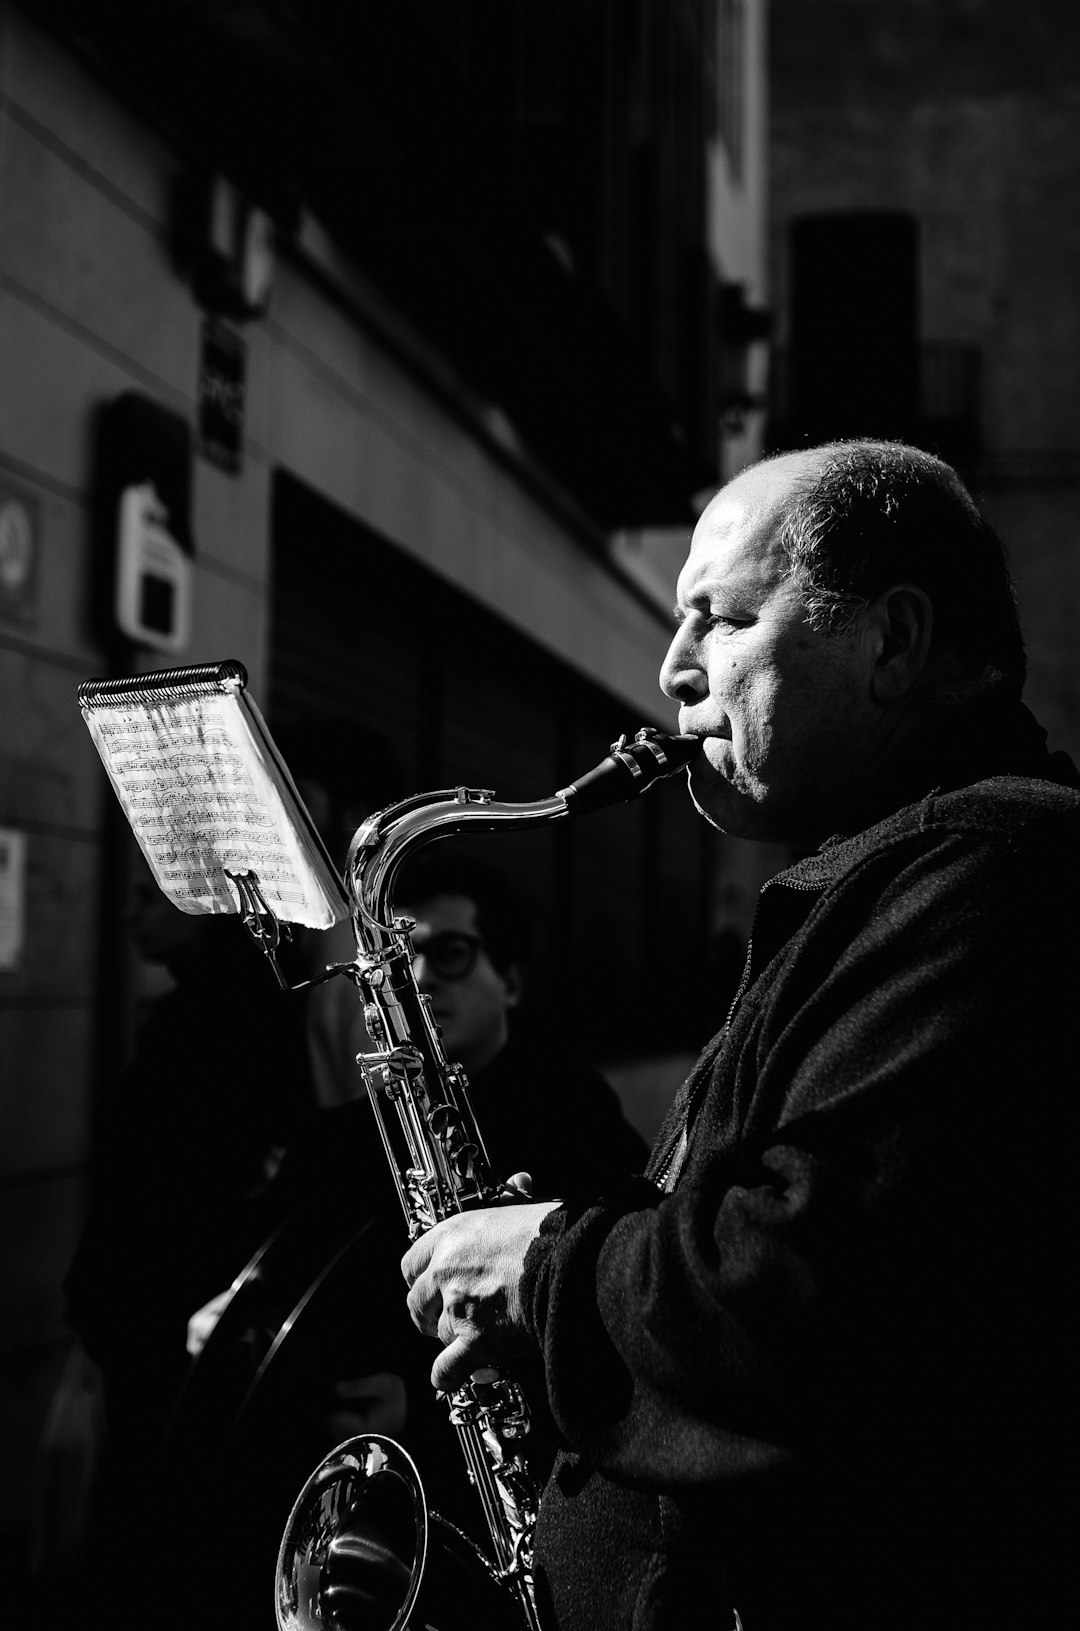 Saxophonist playing